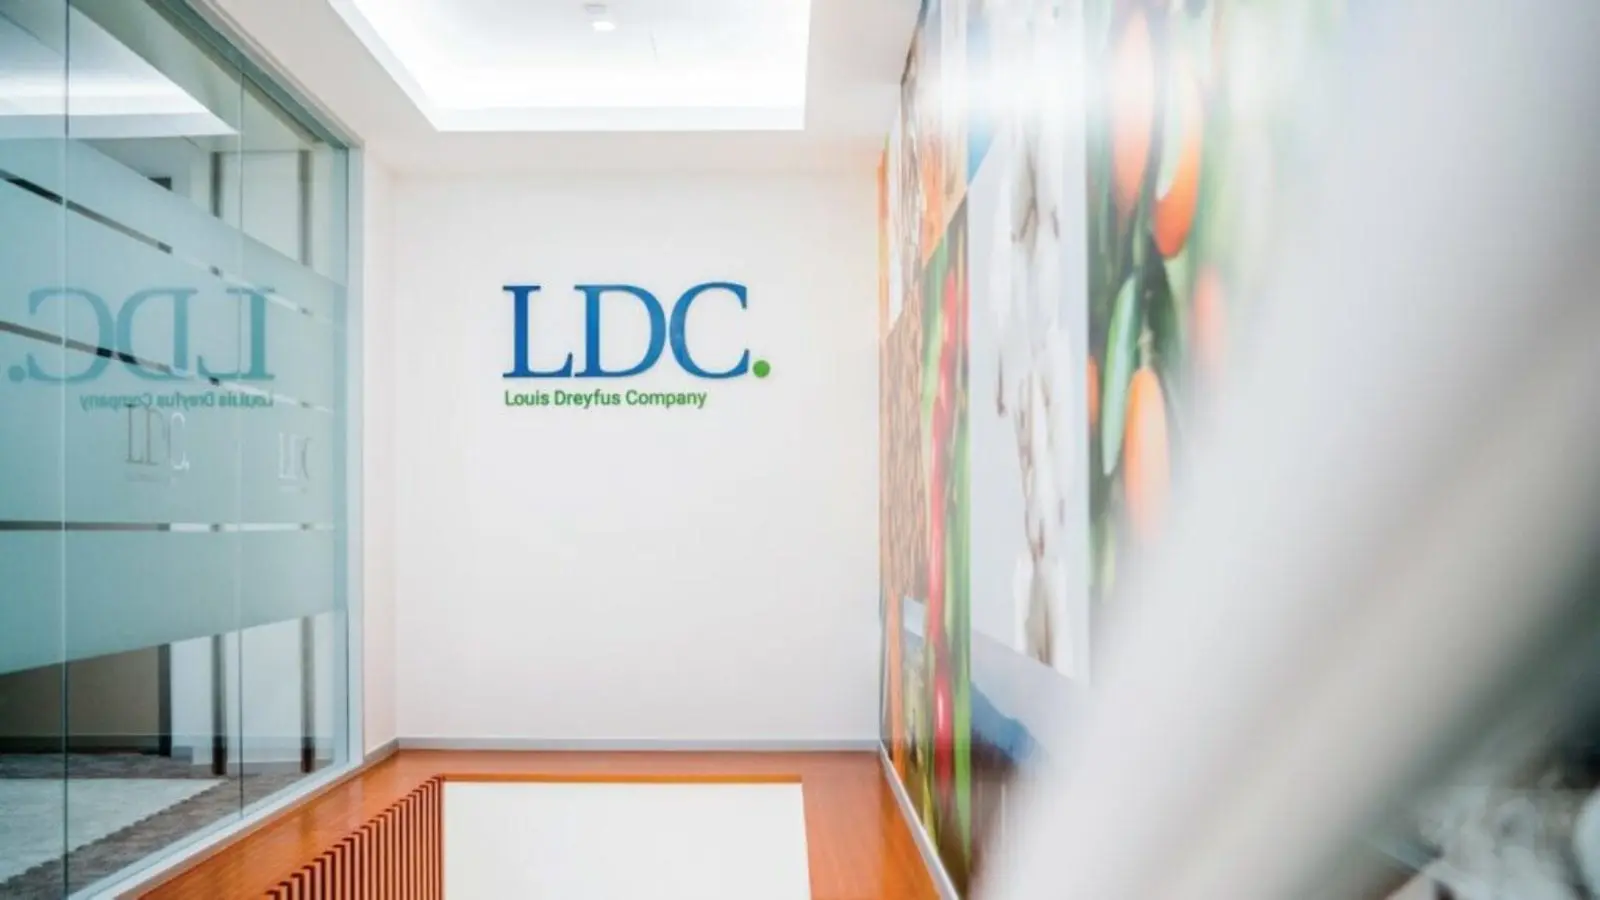 Louis Dreyfus Co. demonstrates resilience amid challenges